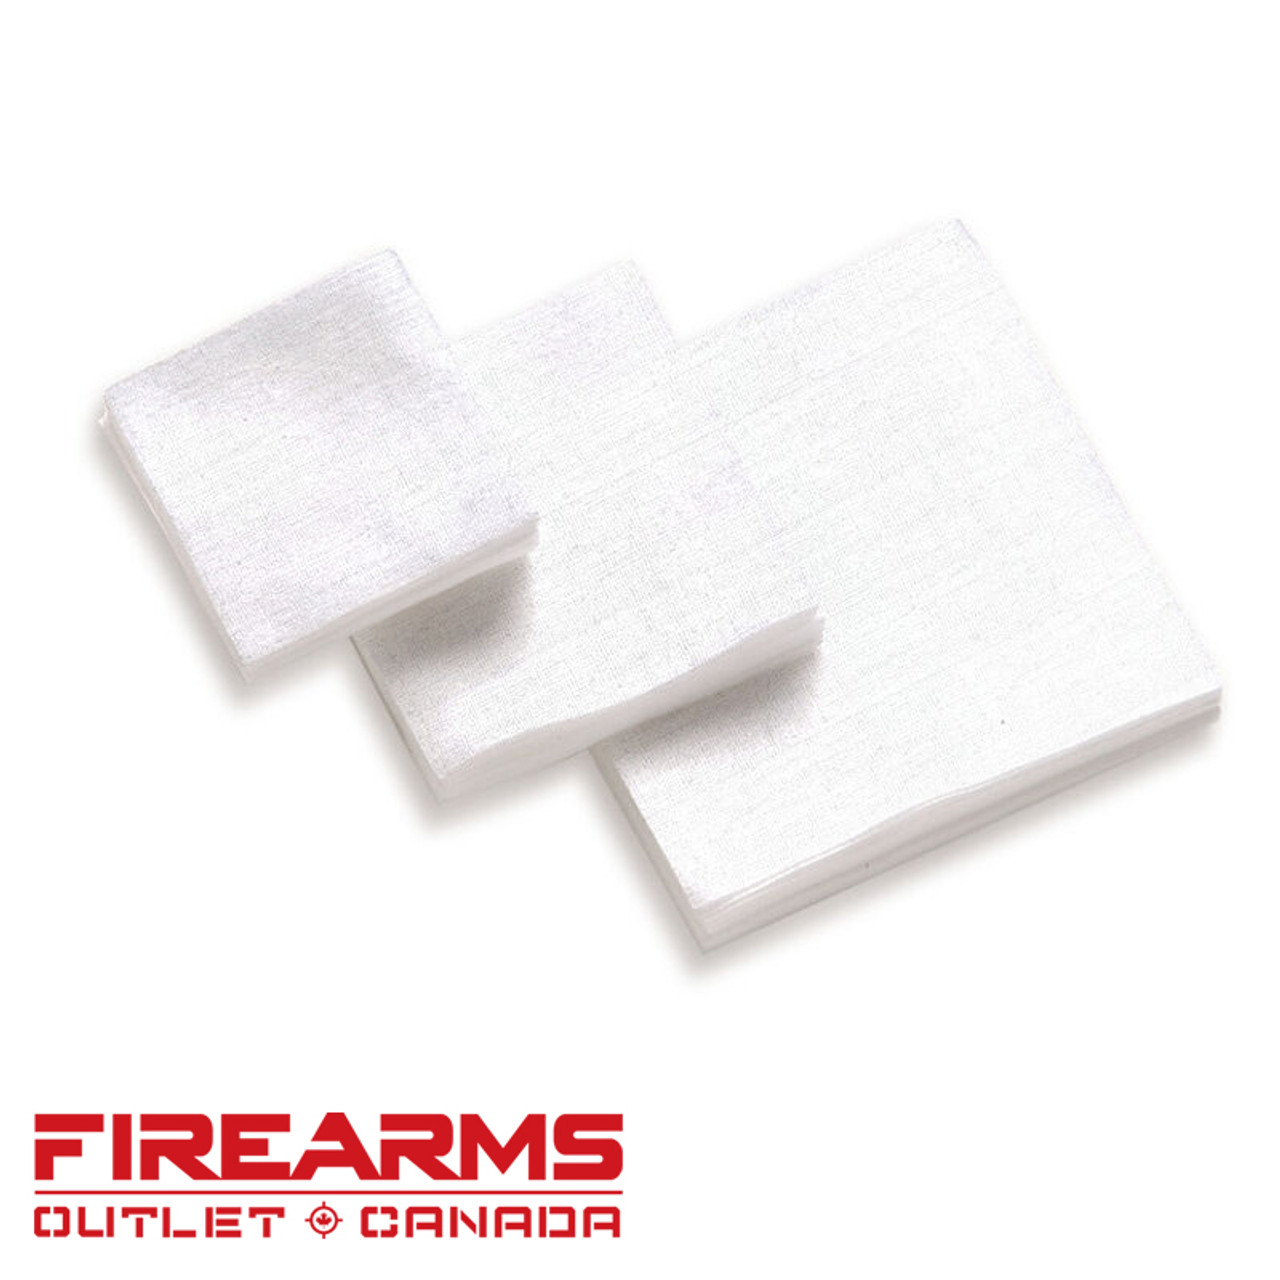 Hoppe's Gun Cleaning Patches - 16-12 Gauge, 300 Pack  [1205S]